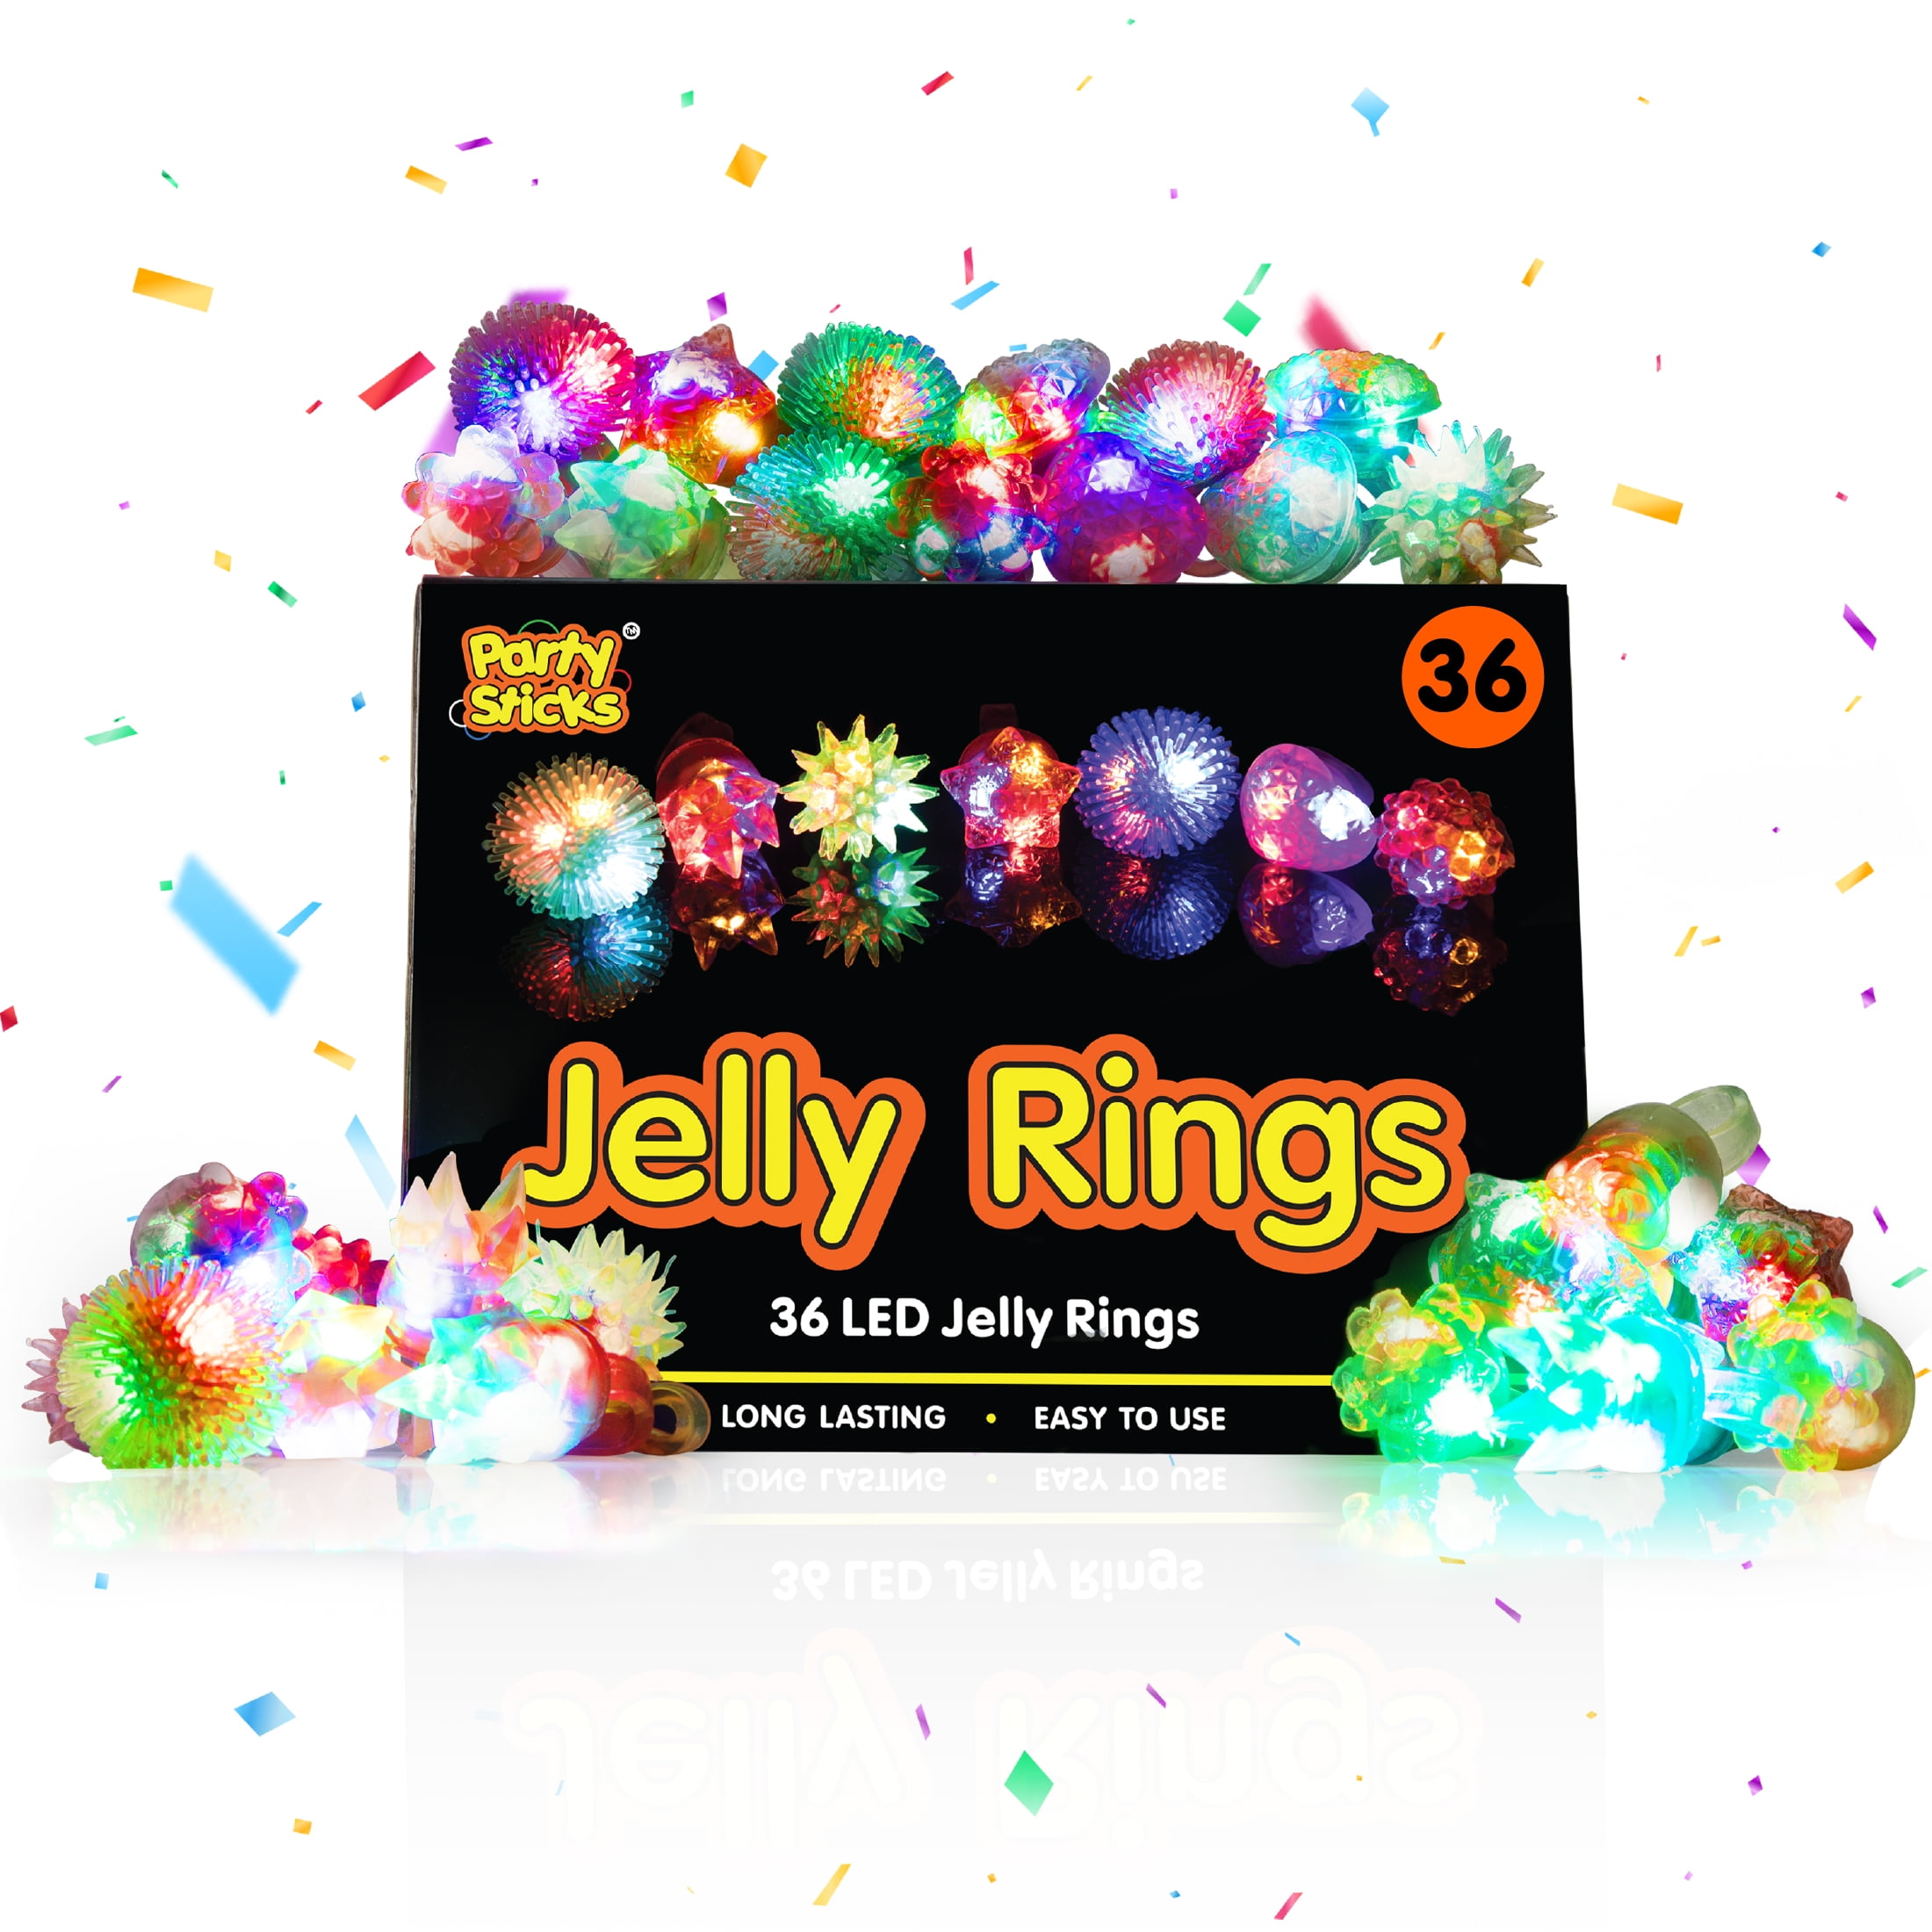 New 24 Ghost Flashing LED Jelly Rings Light Up Finger Glow Toy Party Bag Favors 